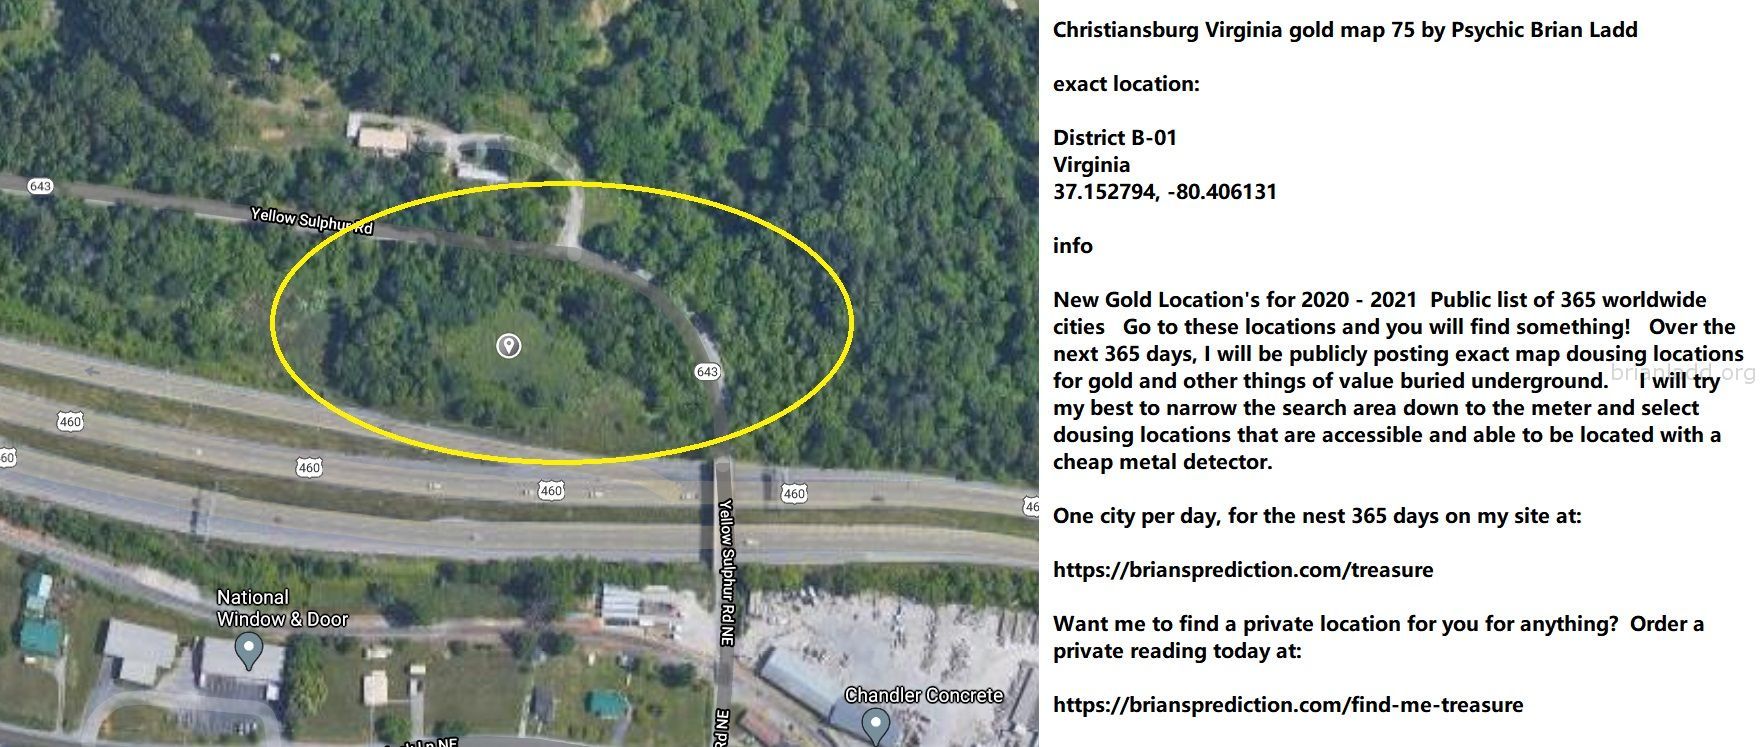 Christiansburg Virginia Gold Map 75 By Psychic Brian Ladd - Christiansburg Virginia Gold Map 75 By Psychic Brian Ladd  E...
Christiansburg Virginia Gold Map 75 By Psychic Brian Ladd  Exact Location:  District B-01  Virginia  37.152794, -80.406131  Info  New Gold Location'S For 2020 - 2021  Public List Of 365 Worldwide Cities  Go To These Locations And You Will Find Something!  Over The Next 365 Days, I Will Be Publicly Posting Exact Map Dousing Locations For Gold And Other Things Of Value Buried Underground.  I Will Try My Best To Narrow The Search Area Down To The Meter And Select Dousing Locations That Are Accessible And Able To Be Located With A Cheap Metal Detector.  One City Per Day, For The Nest 365 Days On My Site At:   https://briansprediction.com/Treasure  Want Me To Find A Private Location For You For Anything?  Order A Private Reading Today At:   https://briansprediction.com/Find-Me-Treasure
